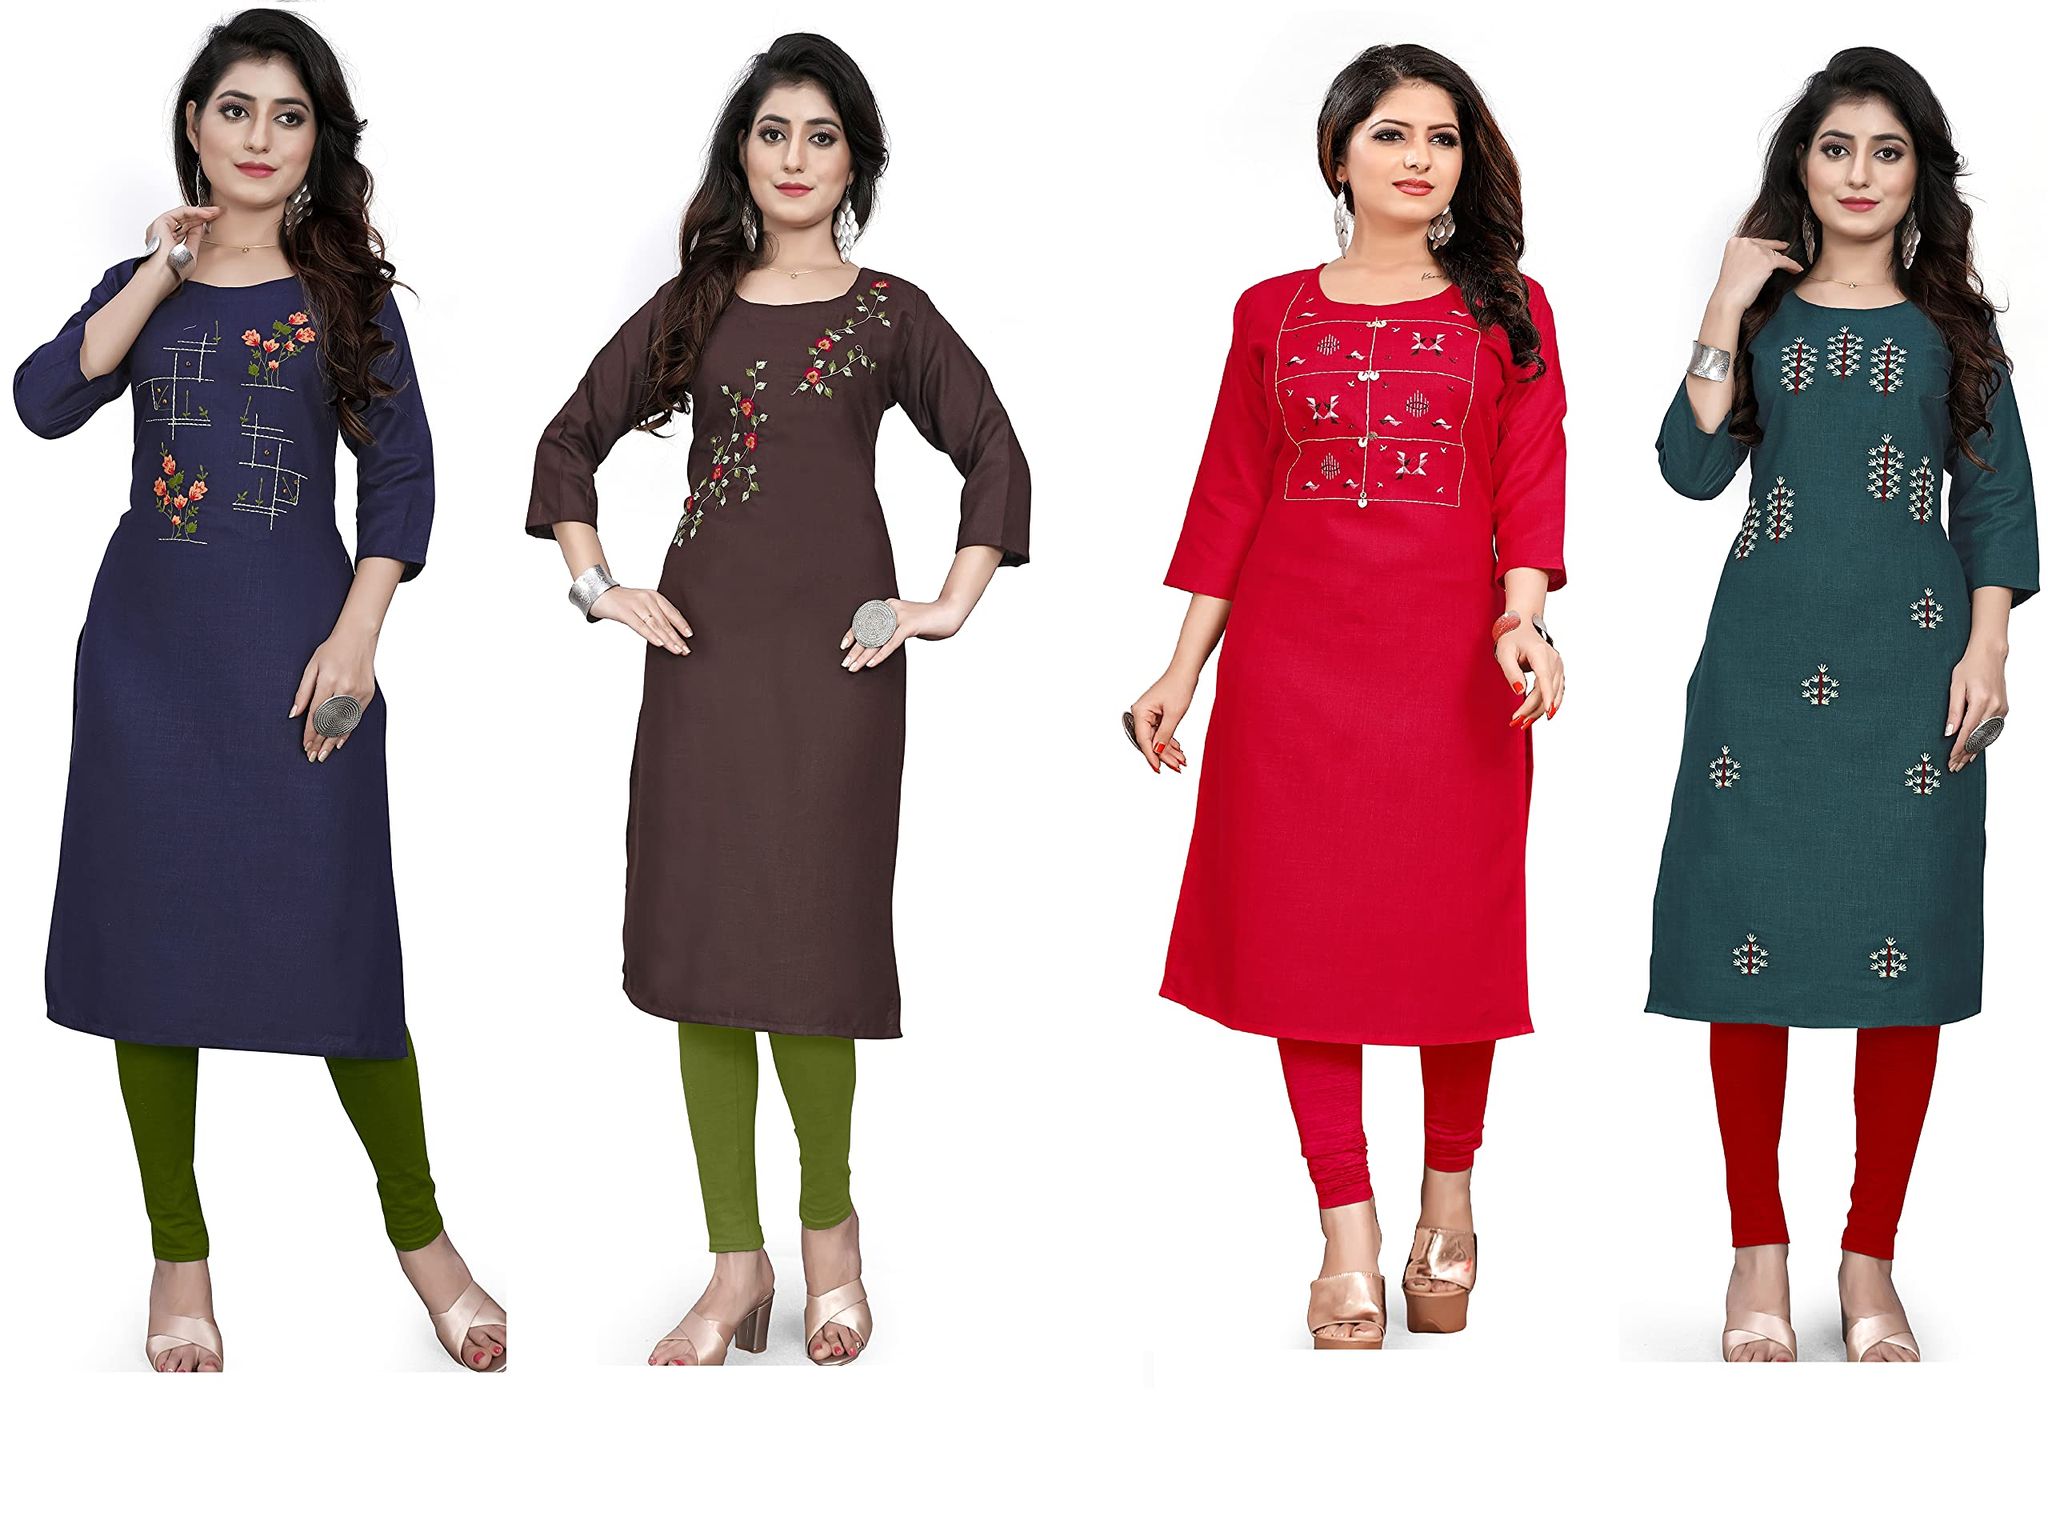 STYLEOO Rayon Embroidered Kurta / kurties for Women and Girls Pack of 4 (M, L, XL, XXL)